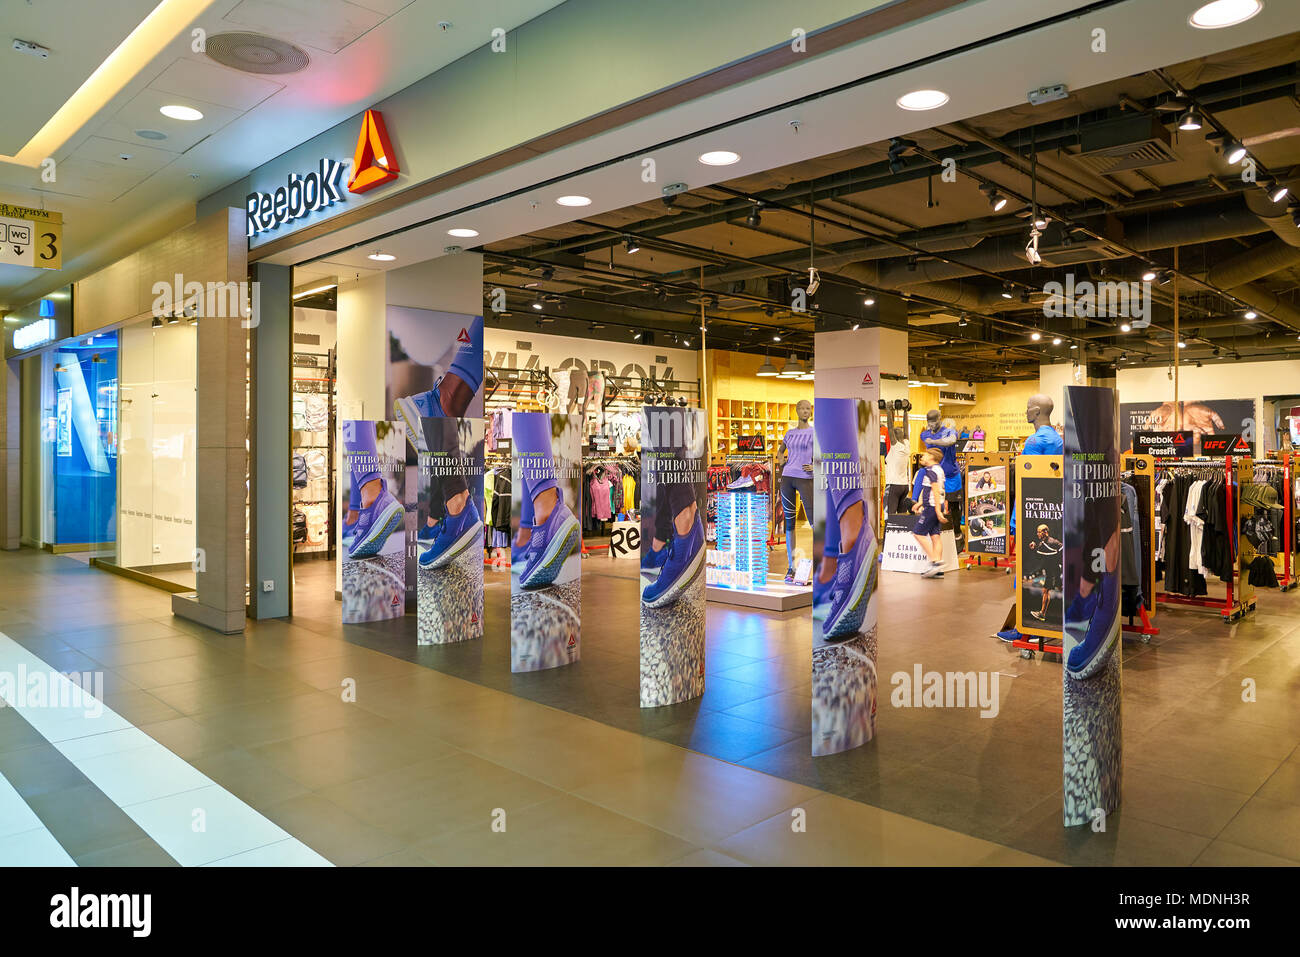 SAINT PETERSBURG, RUSSIA - CIRCA AUGUST, 2017: Reebok store at Galeria  shopping center. Reebok is a global athletic footwear and apparel company  Stock Photo - Alamy